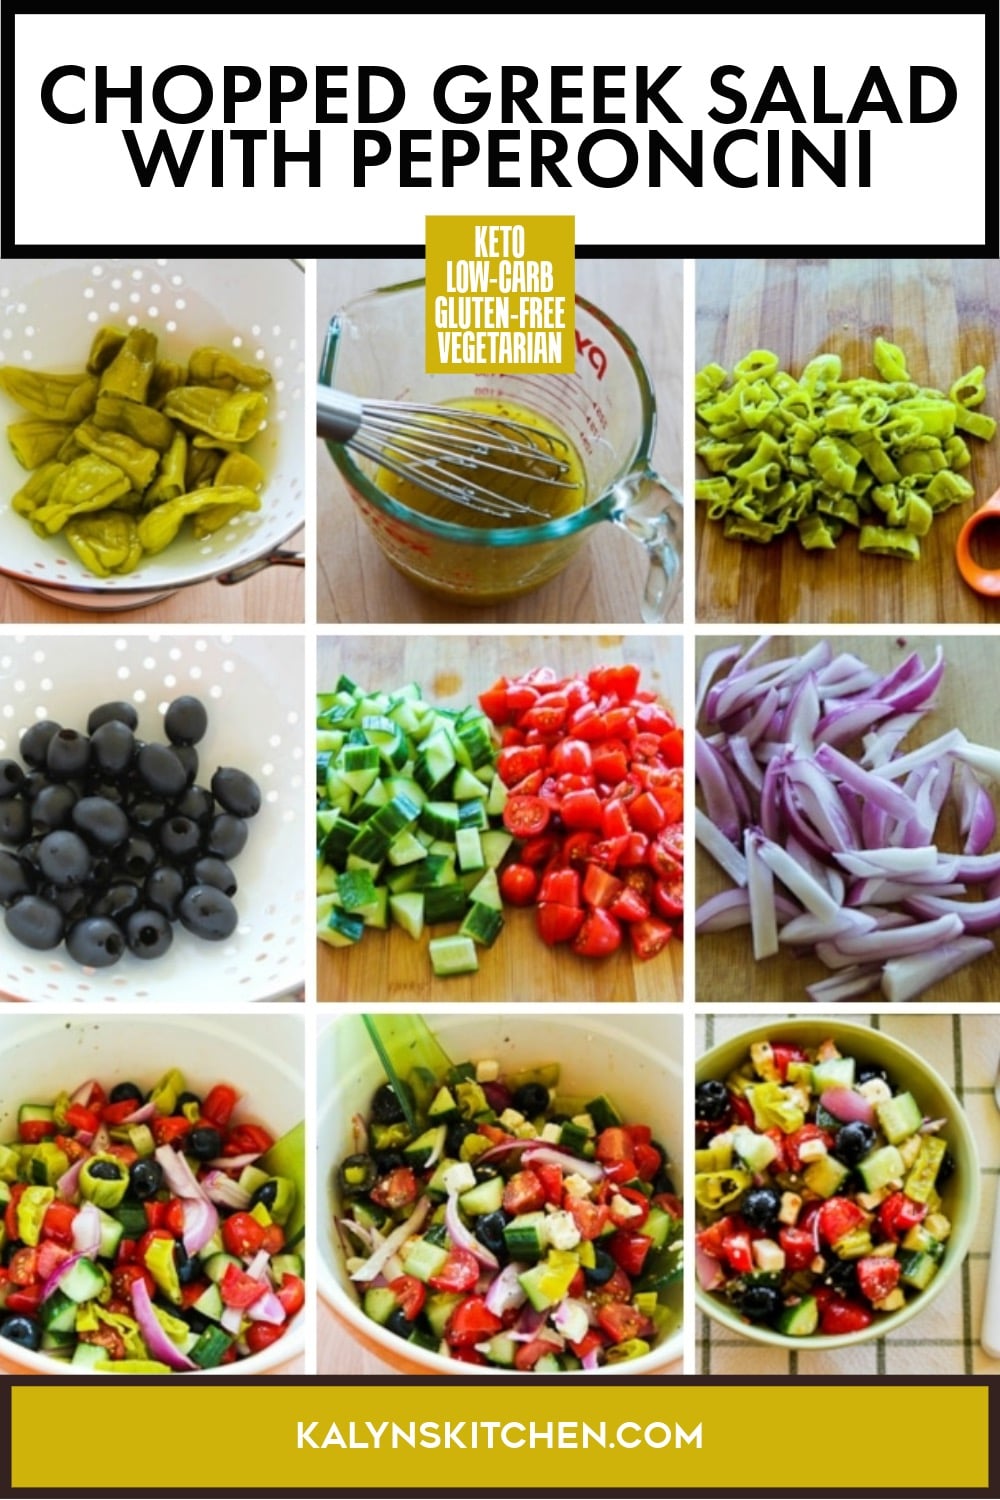 Pinterest image of Chopped Greek Salad with Peperoncini